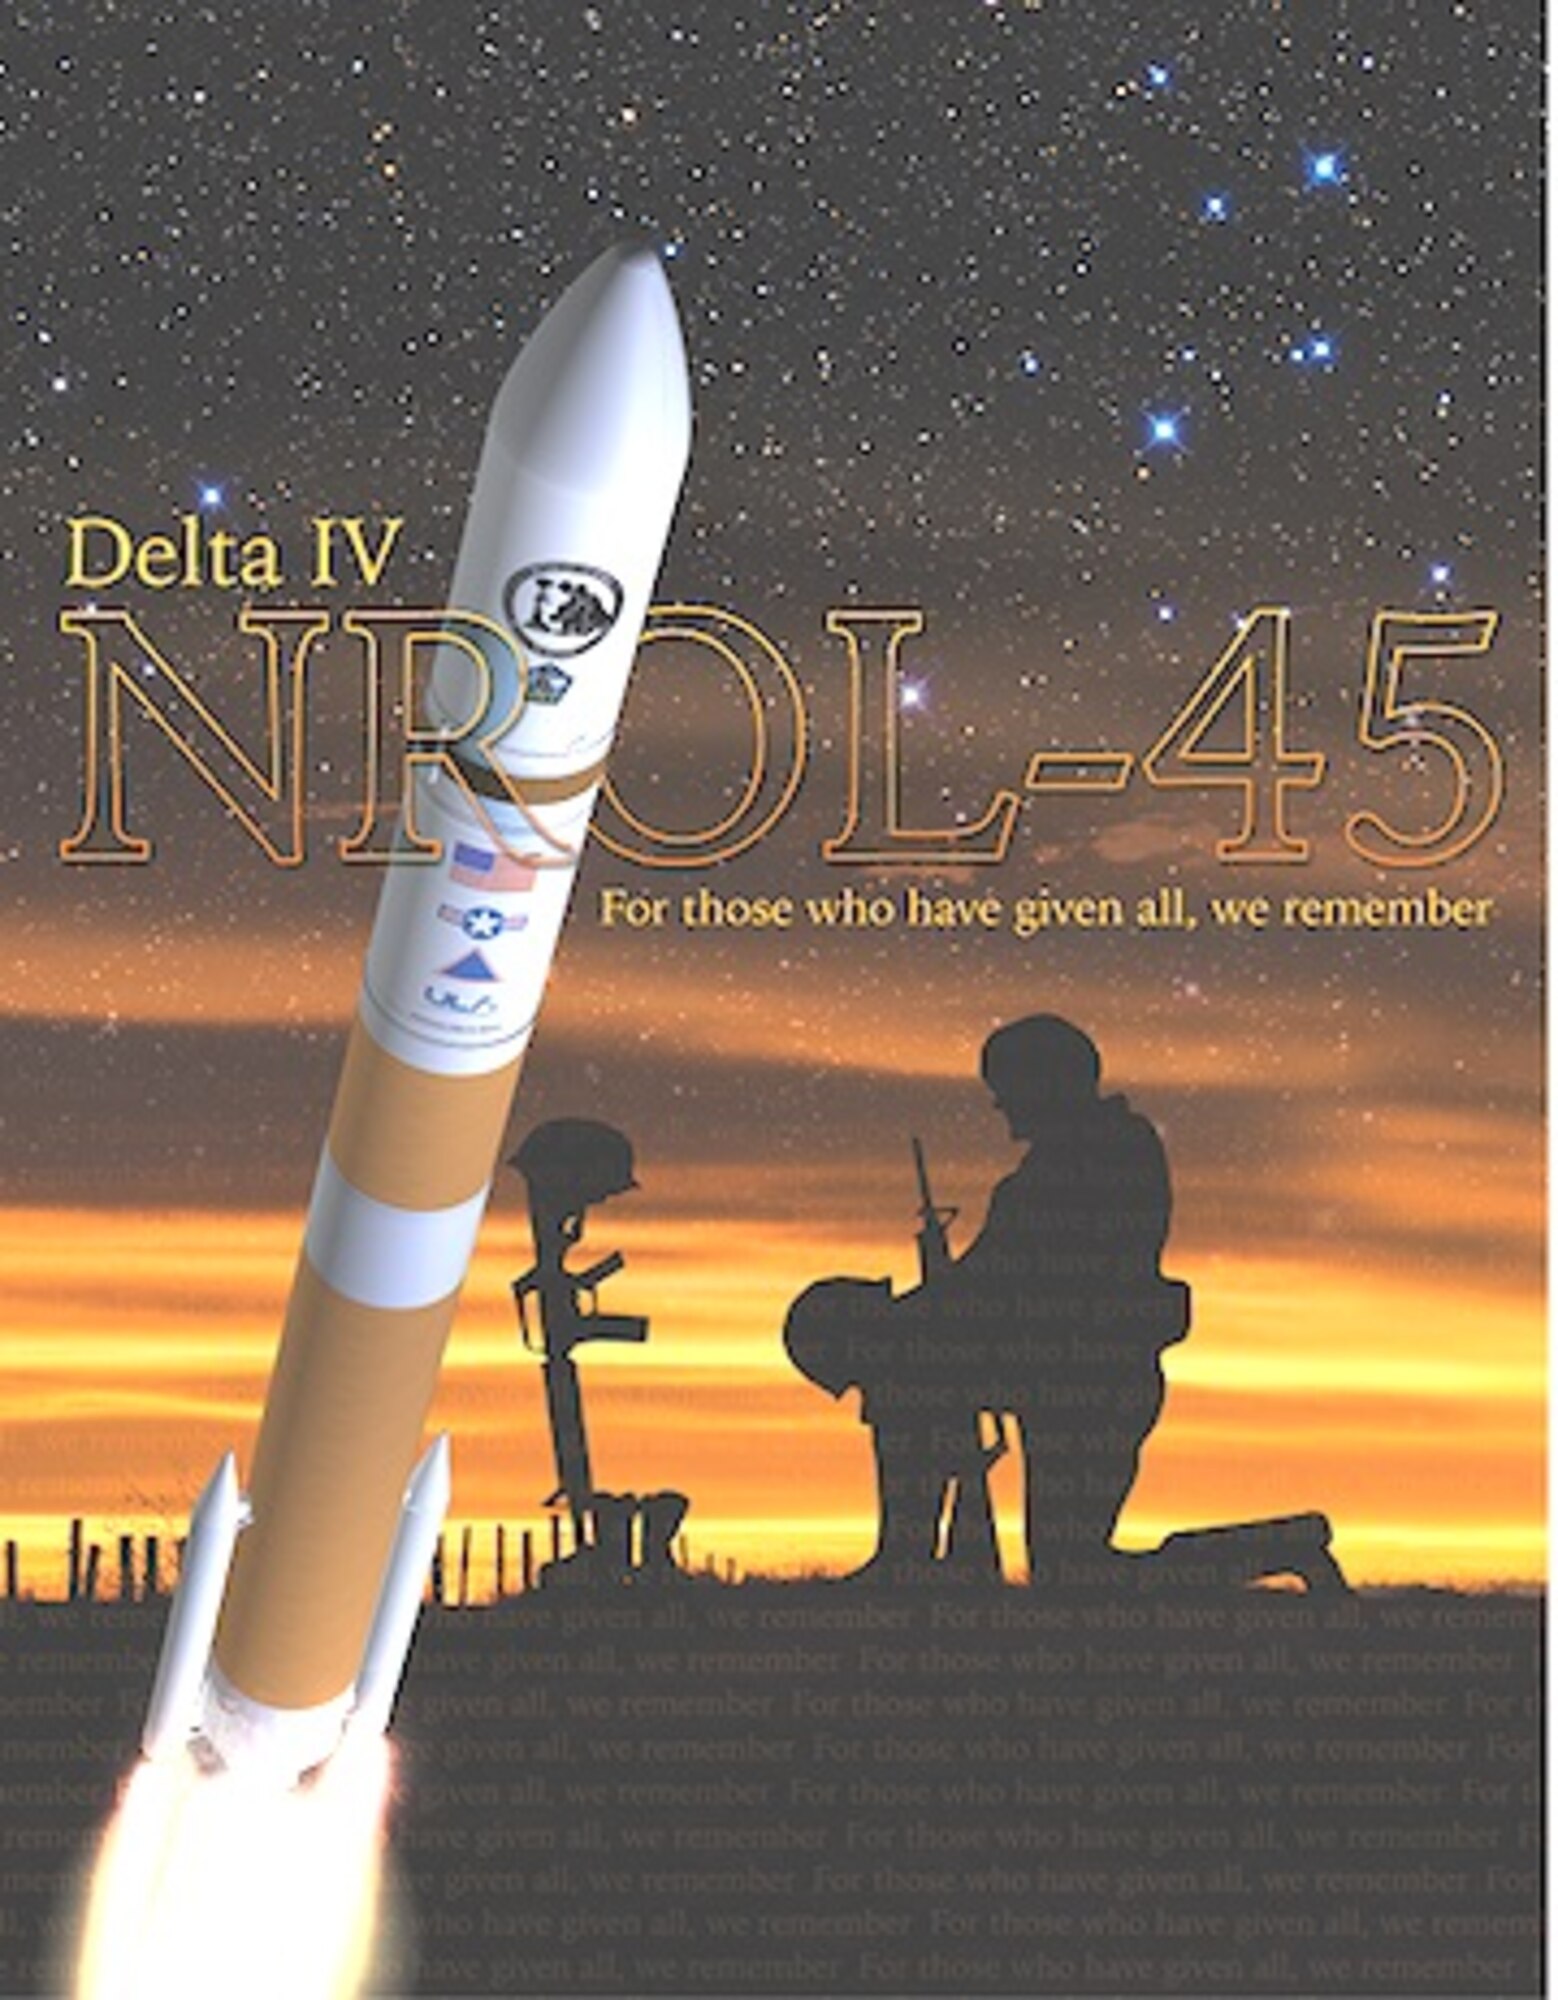 Official poster of the NROL-45 mission, dedicated to fallen warriors in service to their country with the statement, For those who have given all, we remember. A United Launch Alliance Delta IV Medium+ (5,2) rocket successfully delivered a satellite, designated NROL-45, to orbit for the National Reconnaissance Office after lifting off Feb. 10, 2016 at 3:40 a.m. PSF from Space Launch Complex-6 at Vandenberg Air Force Base, Calif. (Courtesy graphic: ULA and NRO) 

In accordance with AFI 84-105, chapter 3, commercial reproduction of this emblem is NOT permitted without the approval of the organization's commander. 